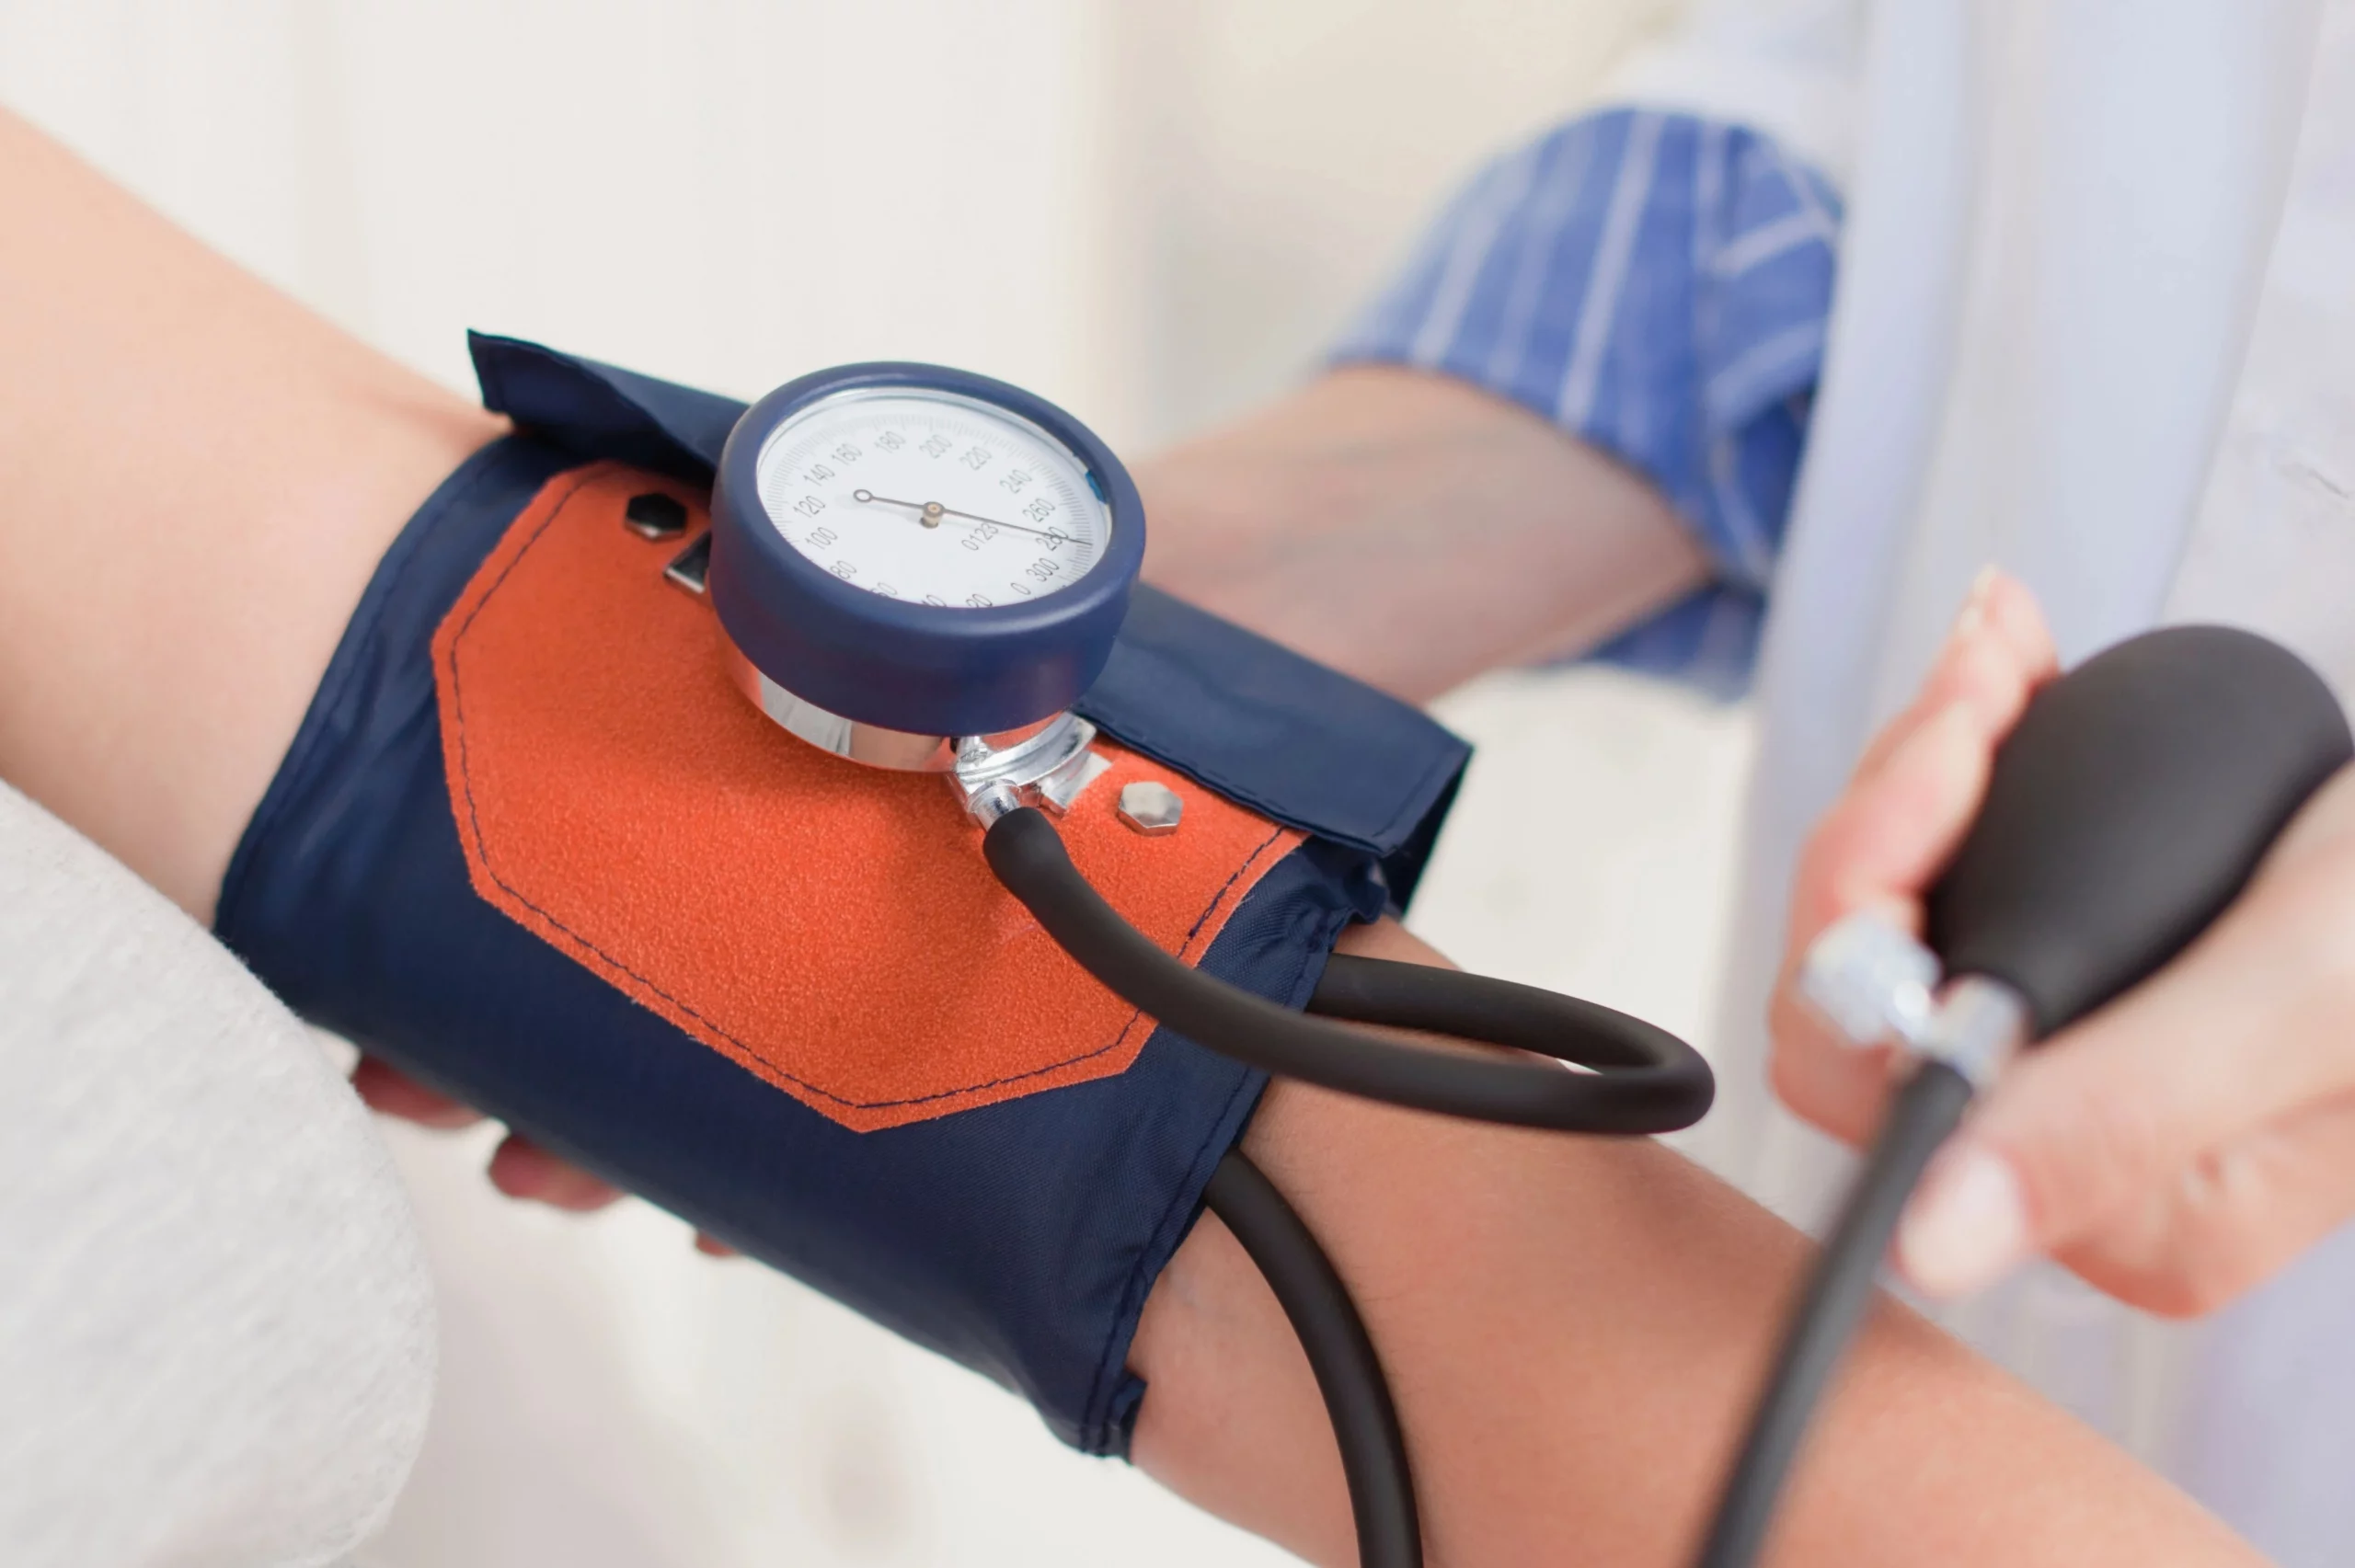 BAD EATING HABITS IF YOU HAVE HIGH BLOOD PRESSURE